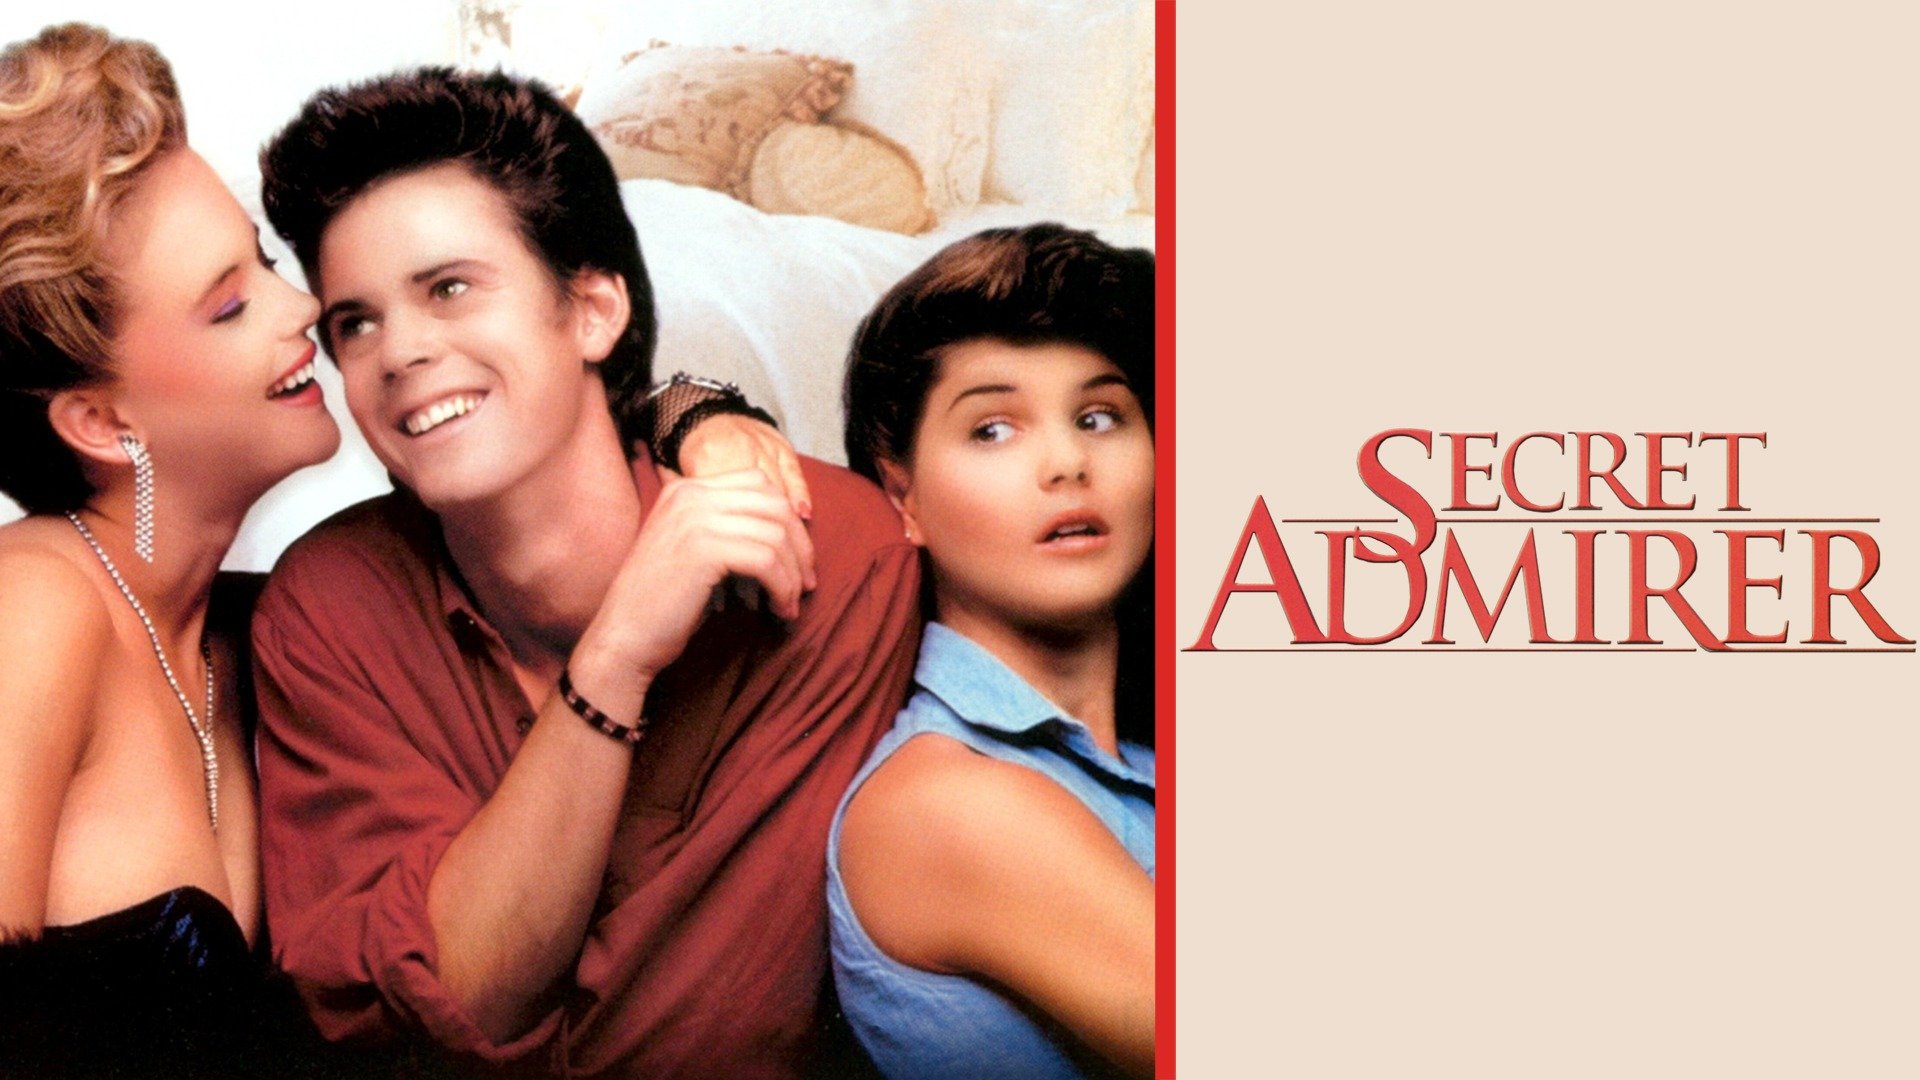 Watch Secret Admirer (1985) Online for Free, The Roku Channel